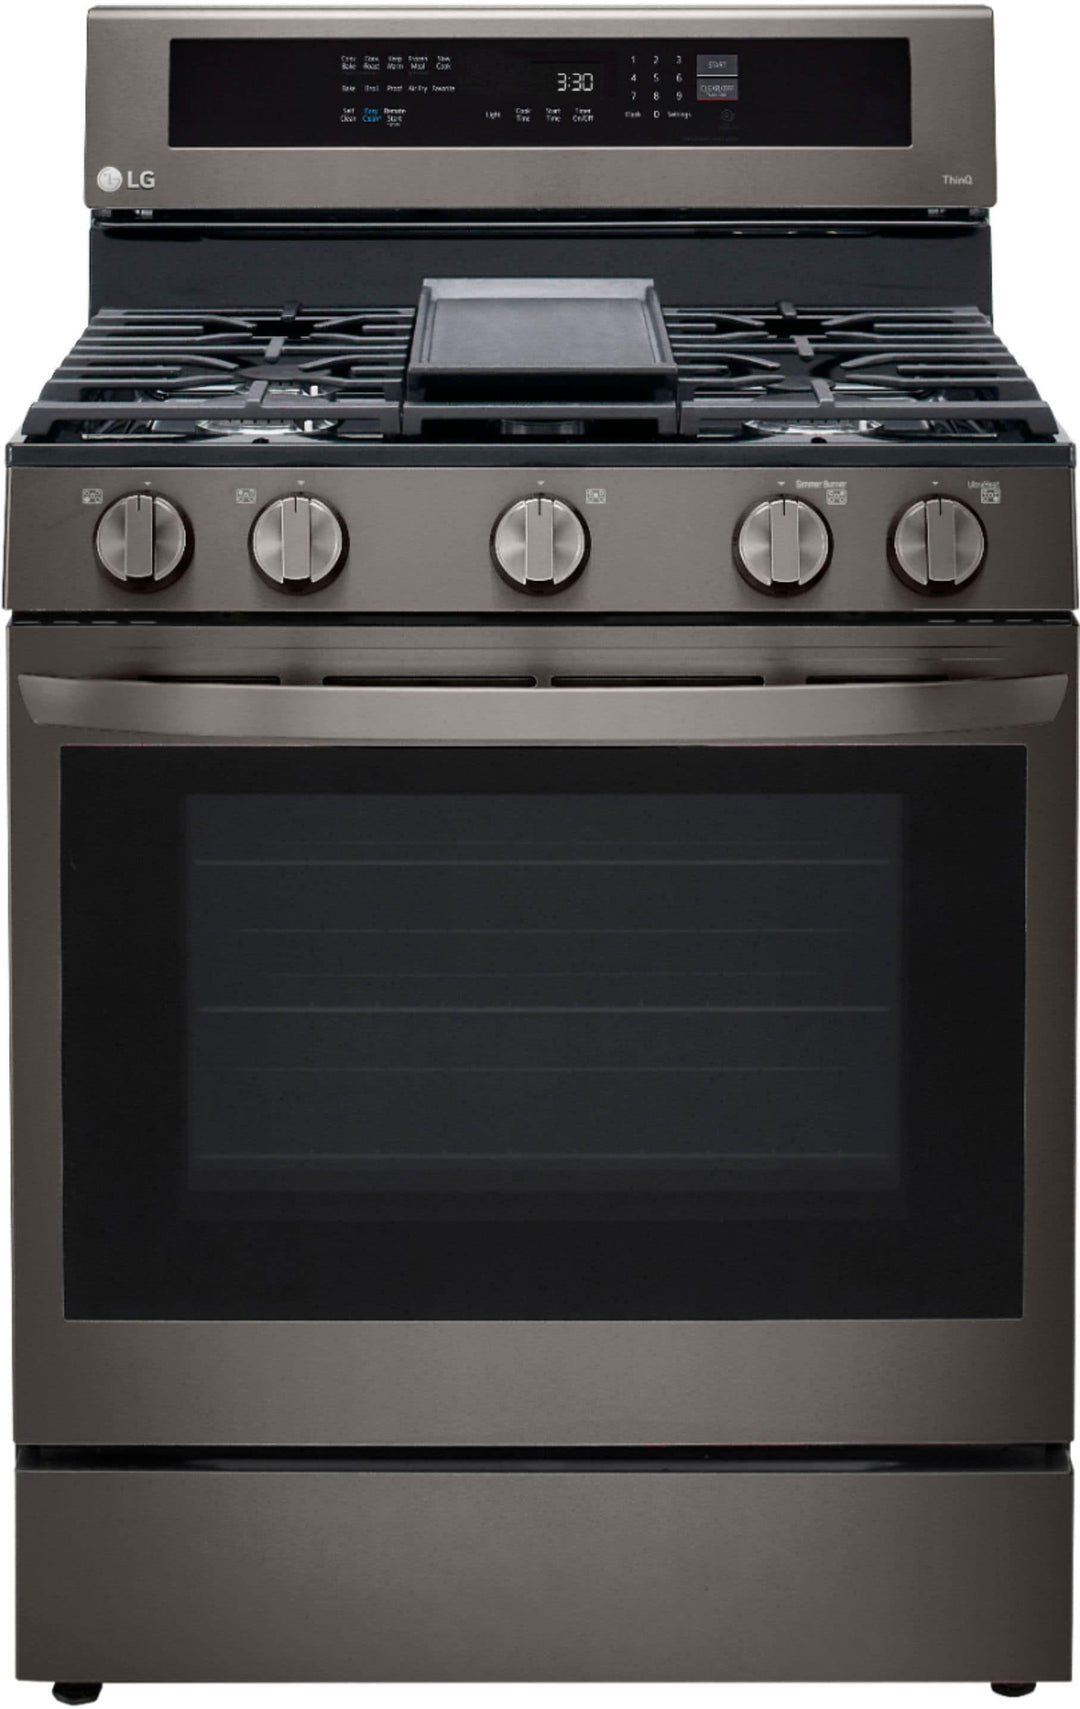 LG - 5.8 Cu. Ft. Freestanding Gas True Convection Range with EasyClean, InstaView and AirFry - Black stainless steel_17